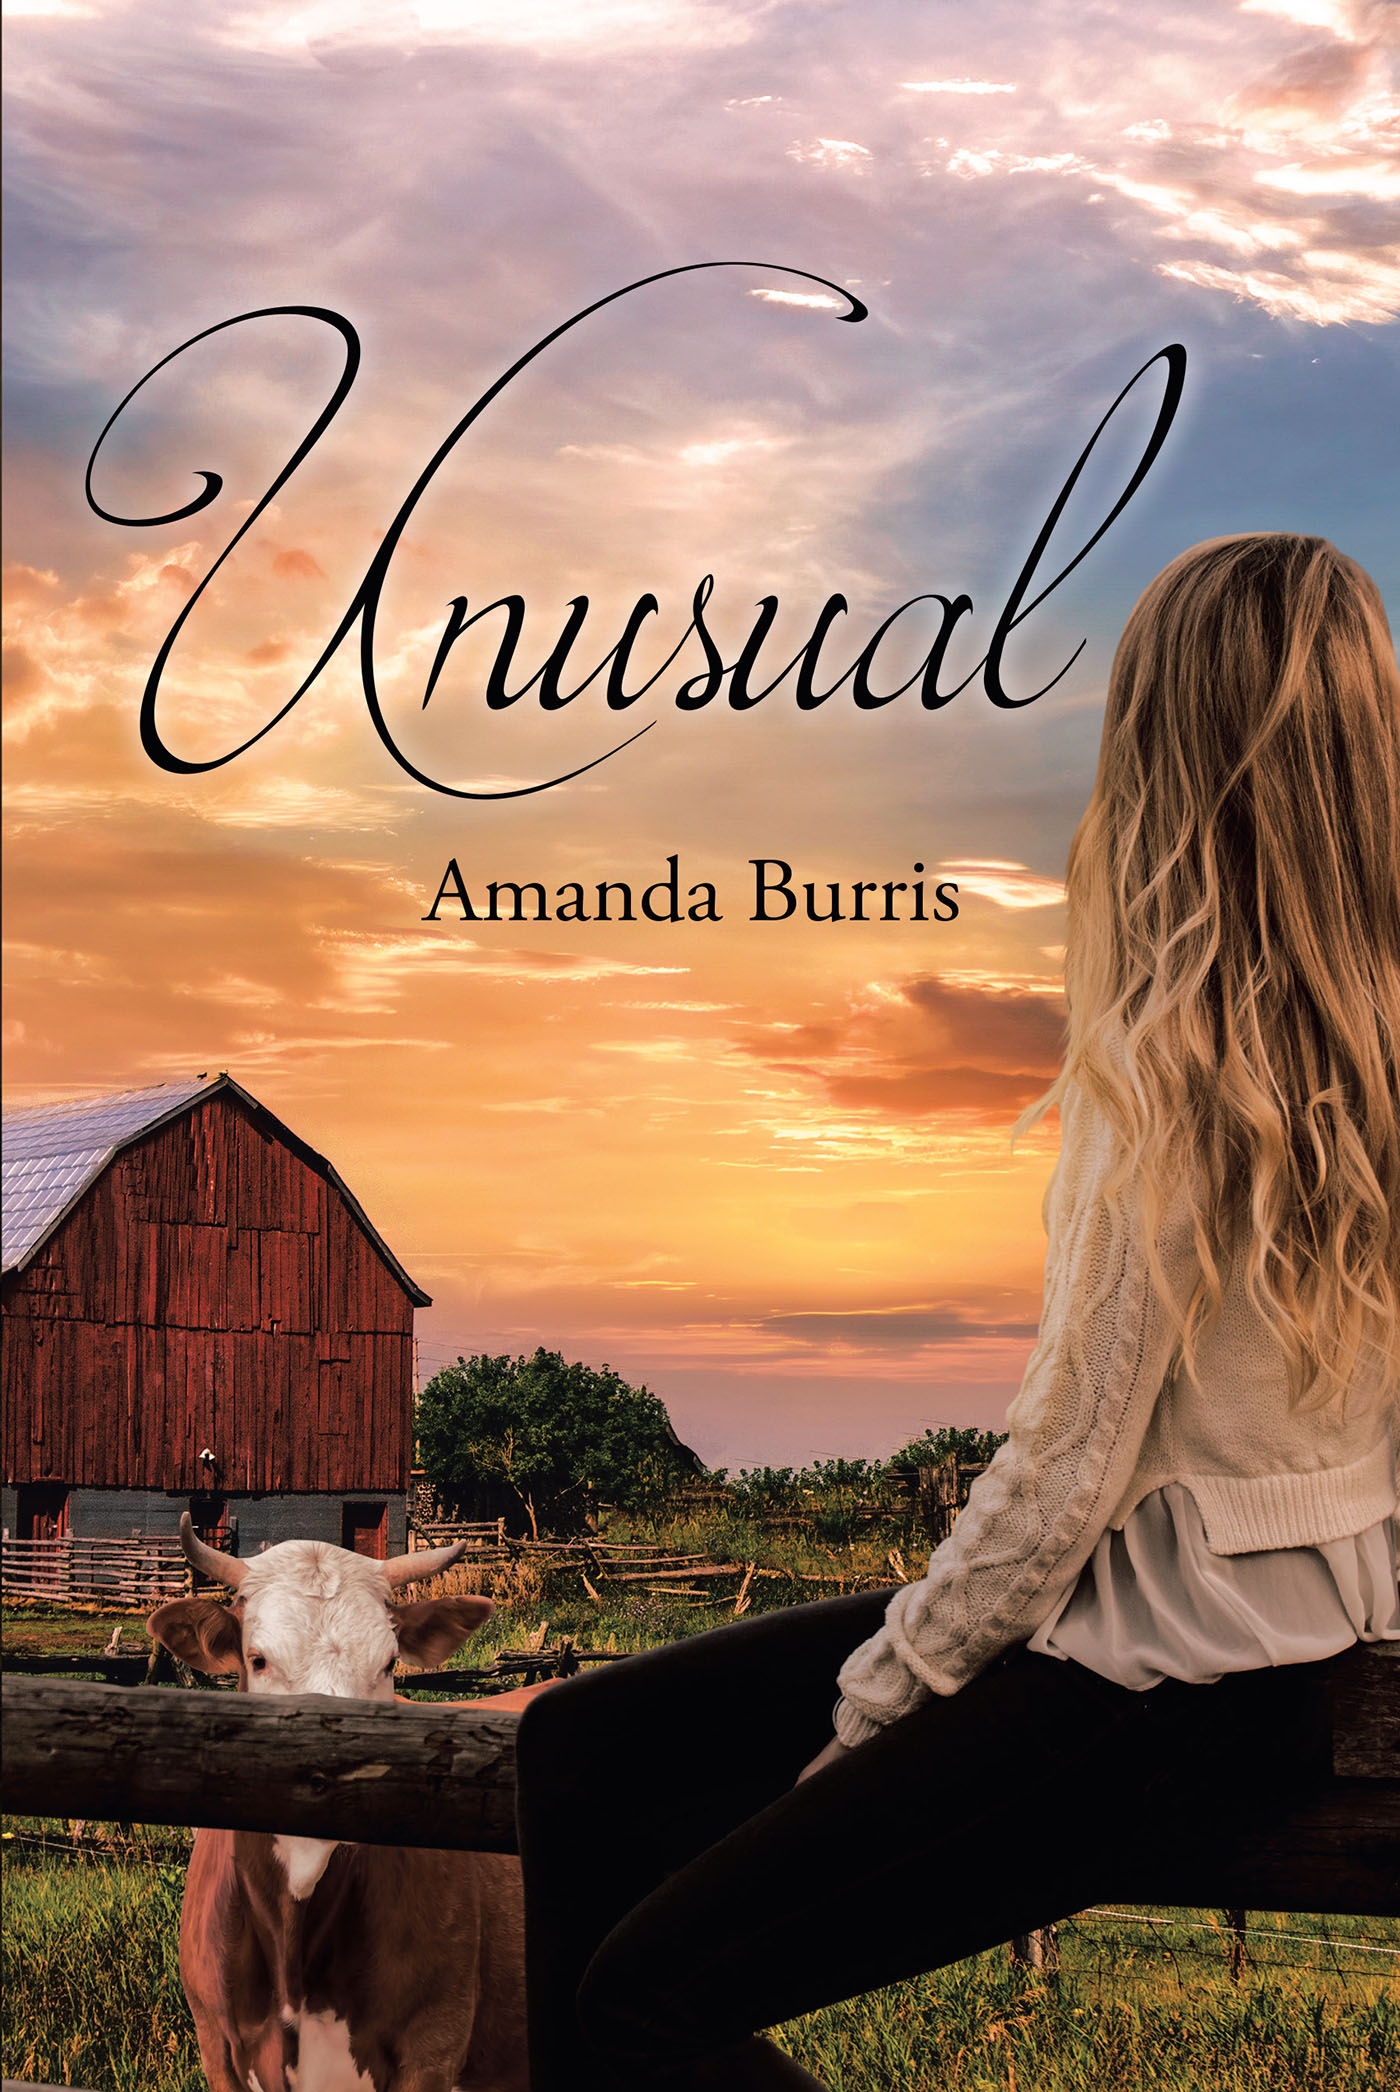 Author Amanda Burris’s New Book, “Unusual,” is a Powerful Memoir Detailing How the Lord Has Helped the Author to Stand Strong in the Face of Adversity and Struggles